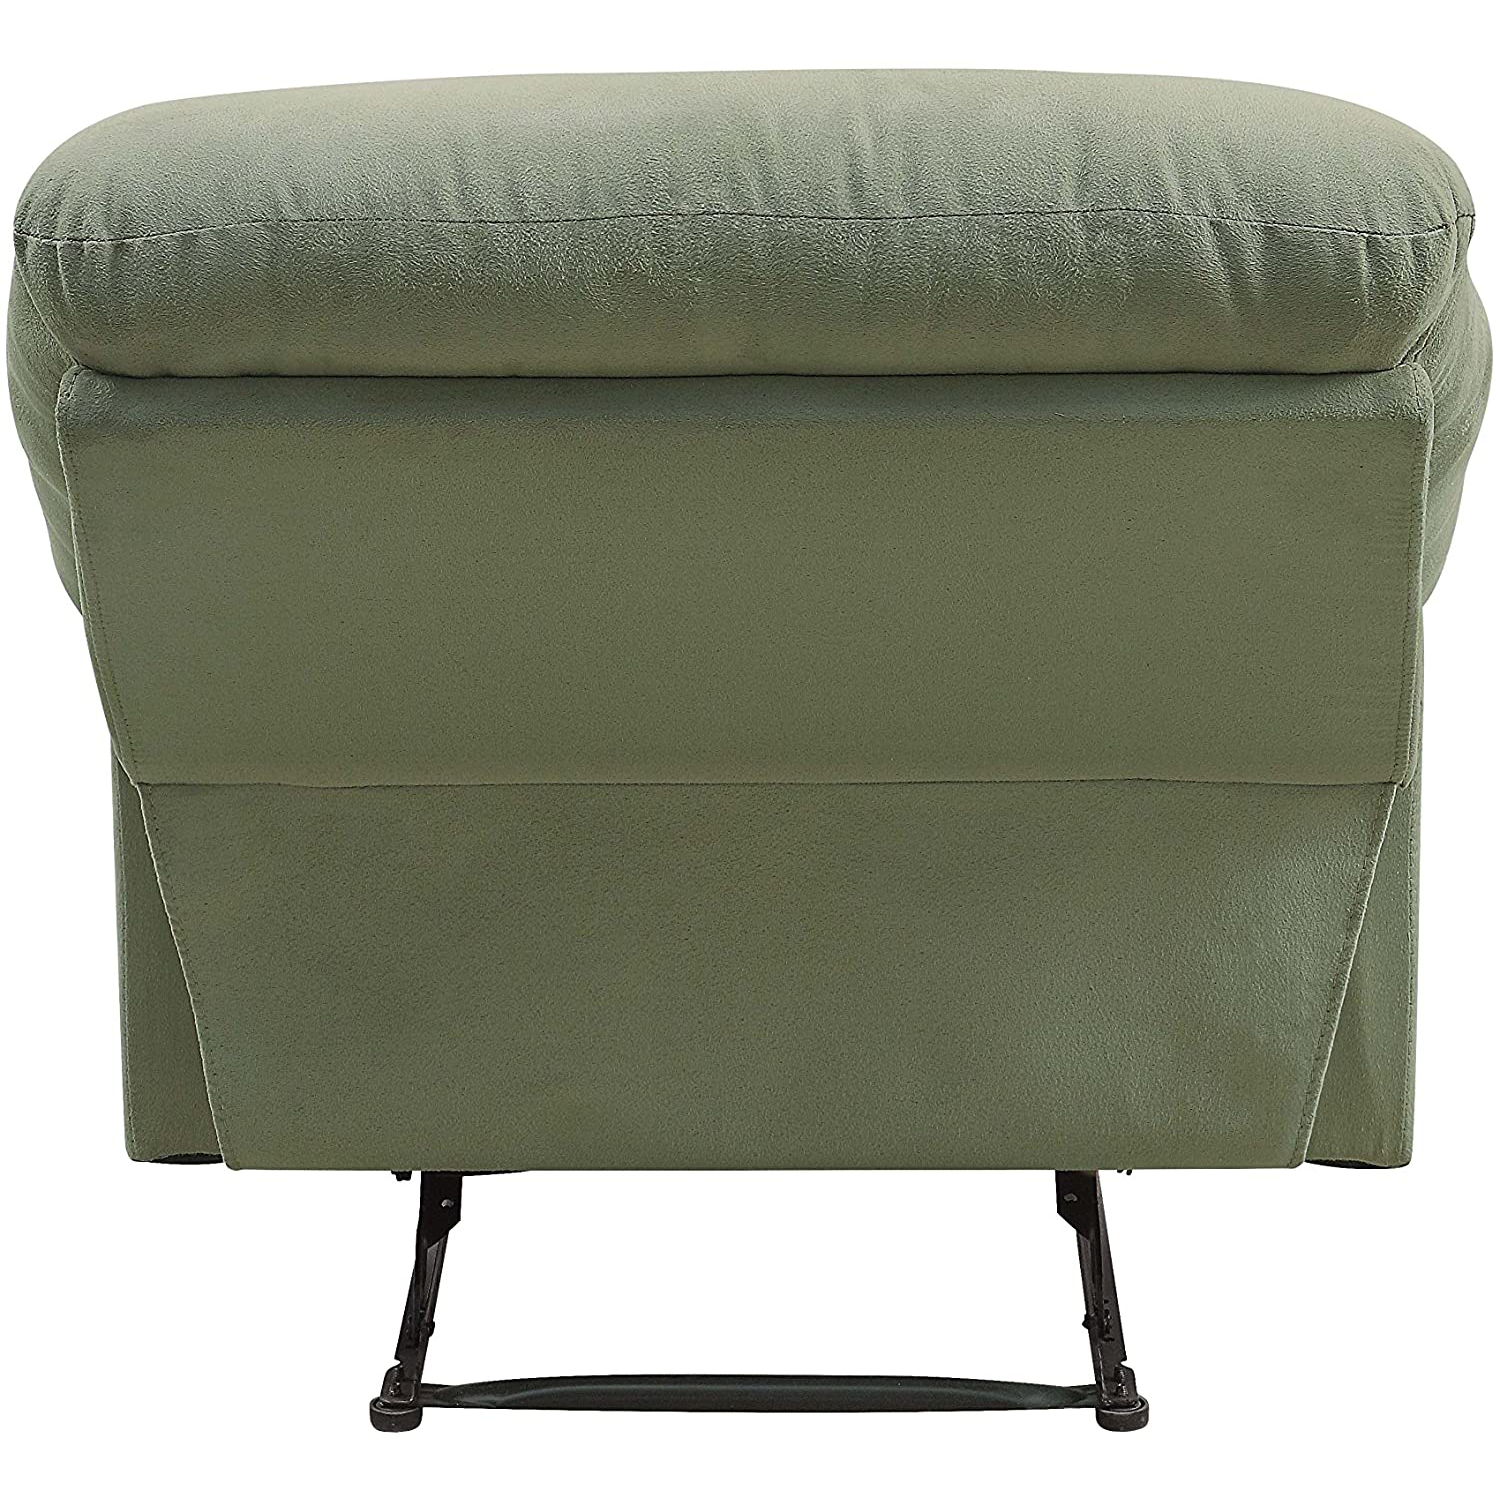 ACME Arcadia Smooth Microfiber Recliner Chair with External Handle, Sage Green - image 2 of 6